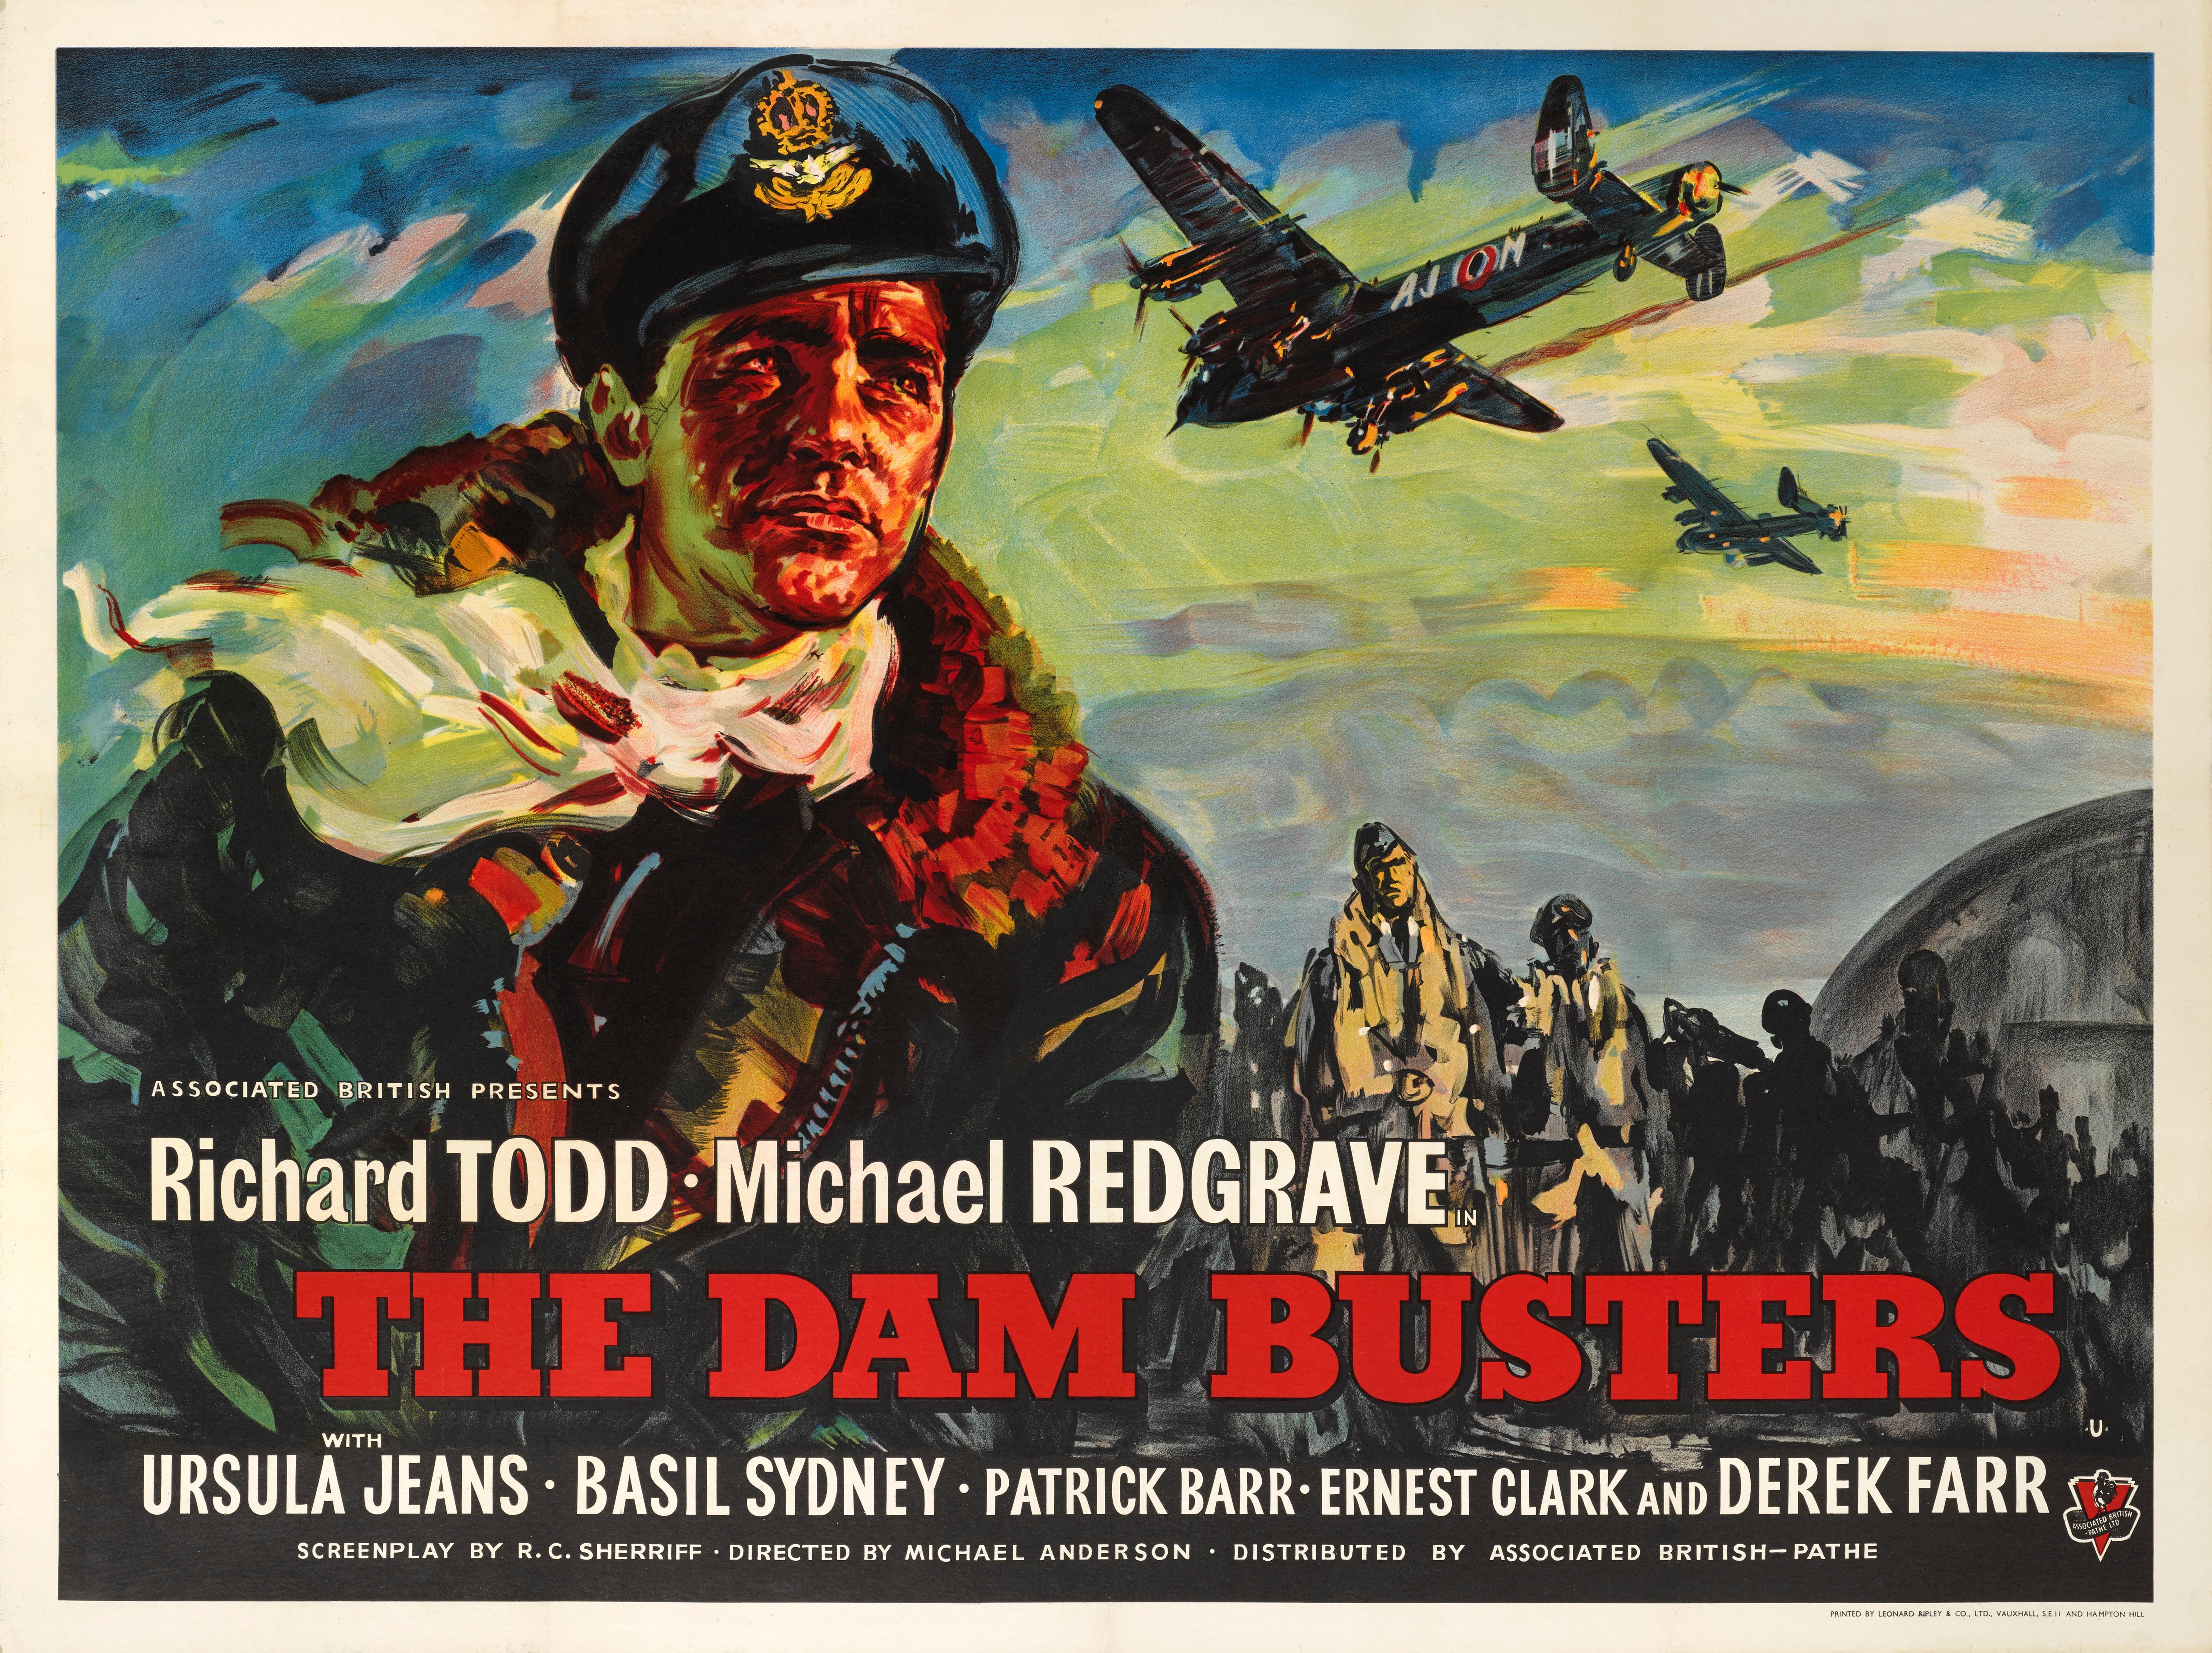 Original British film poster for The Dam Busters 1955. This British epic war film was directed by Michael Anderson, and stars Richard Todd and Michael Redgrave. It was based on two books, The Dam Busters by Paul Brickhill in 1951 and Enemy Coast